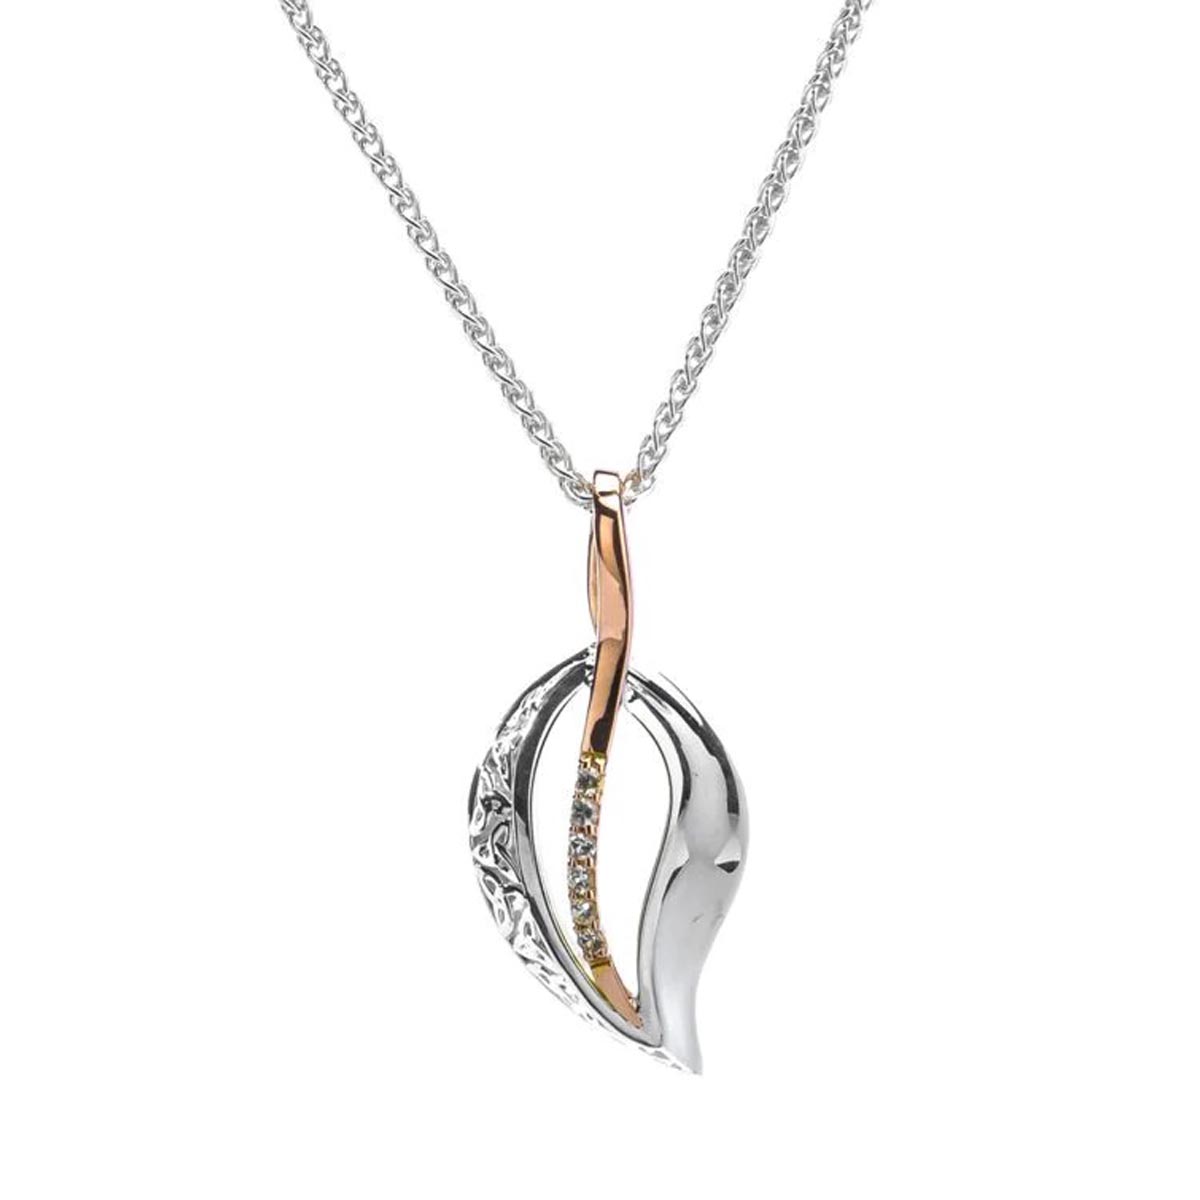 Keith Jack Small Trinity Leaf White Sapphire Necklace in Sterling Silver and 10kt Rose Gold